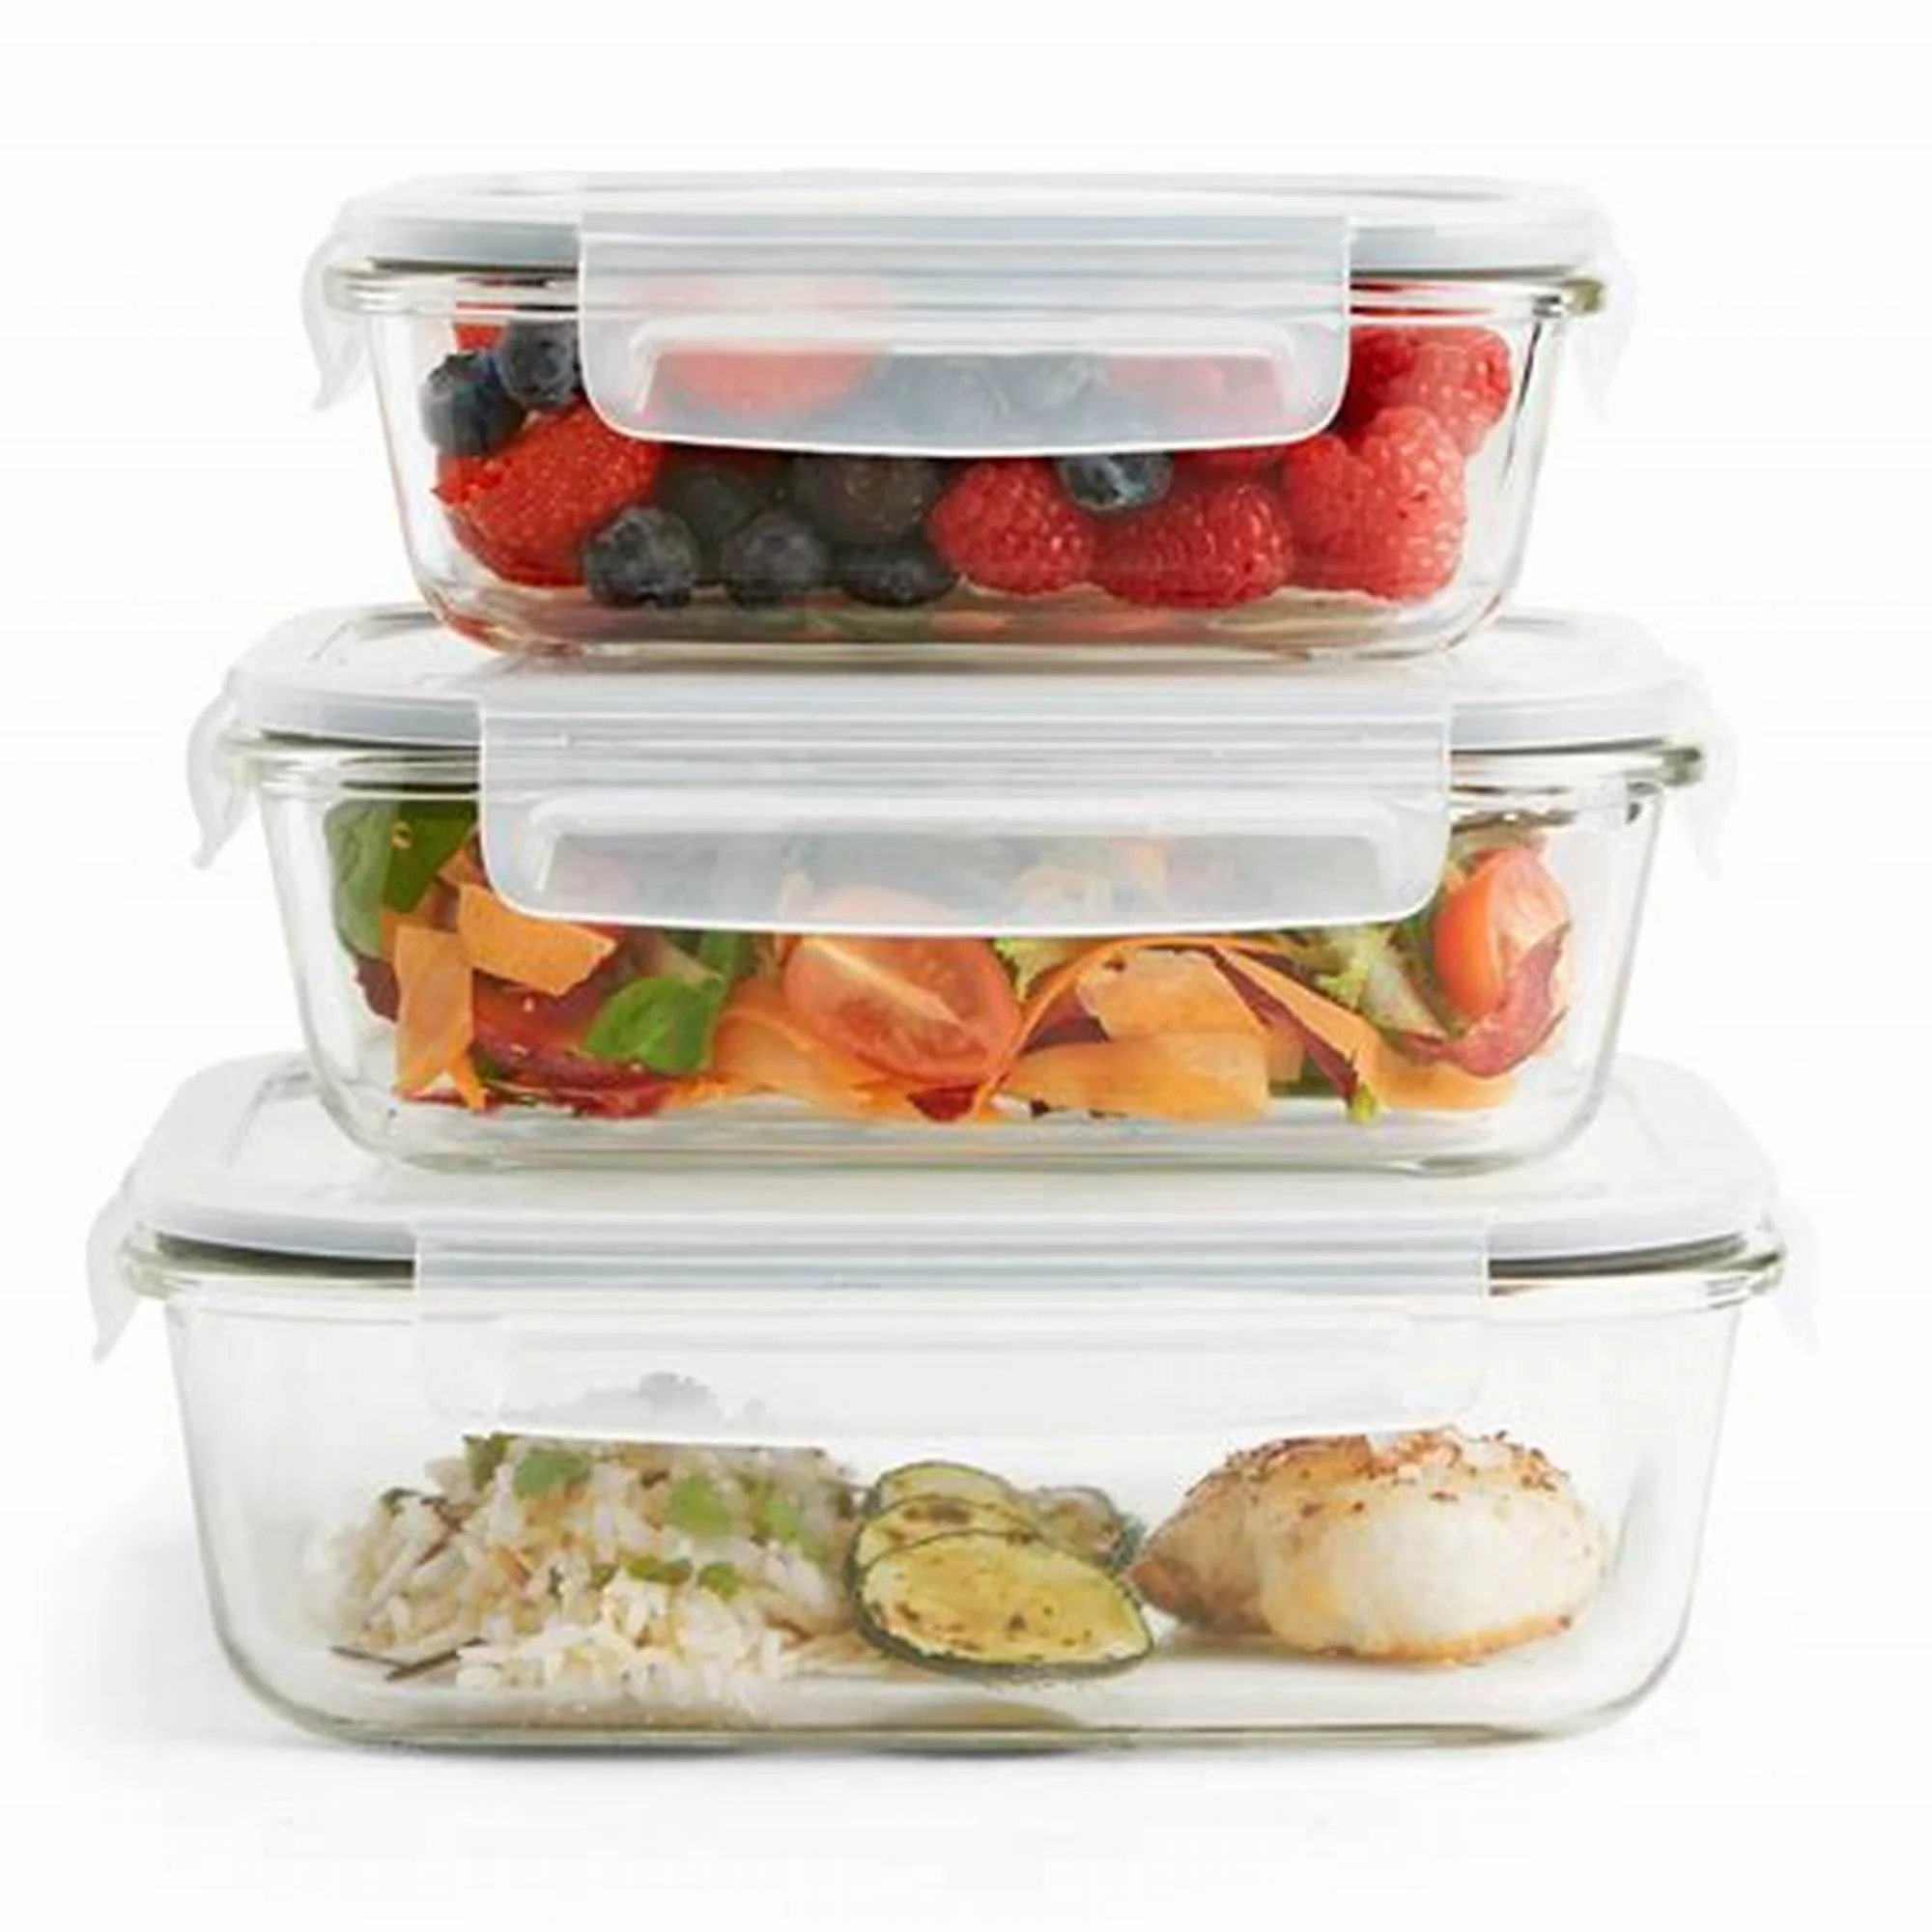 

Rice Meat Storage Boxes & Bins large lunch box with PP lid borosilicate glass food container 1000ml fl oz, Customized color